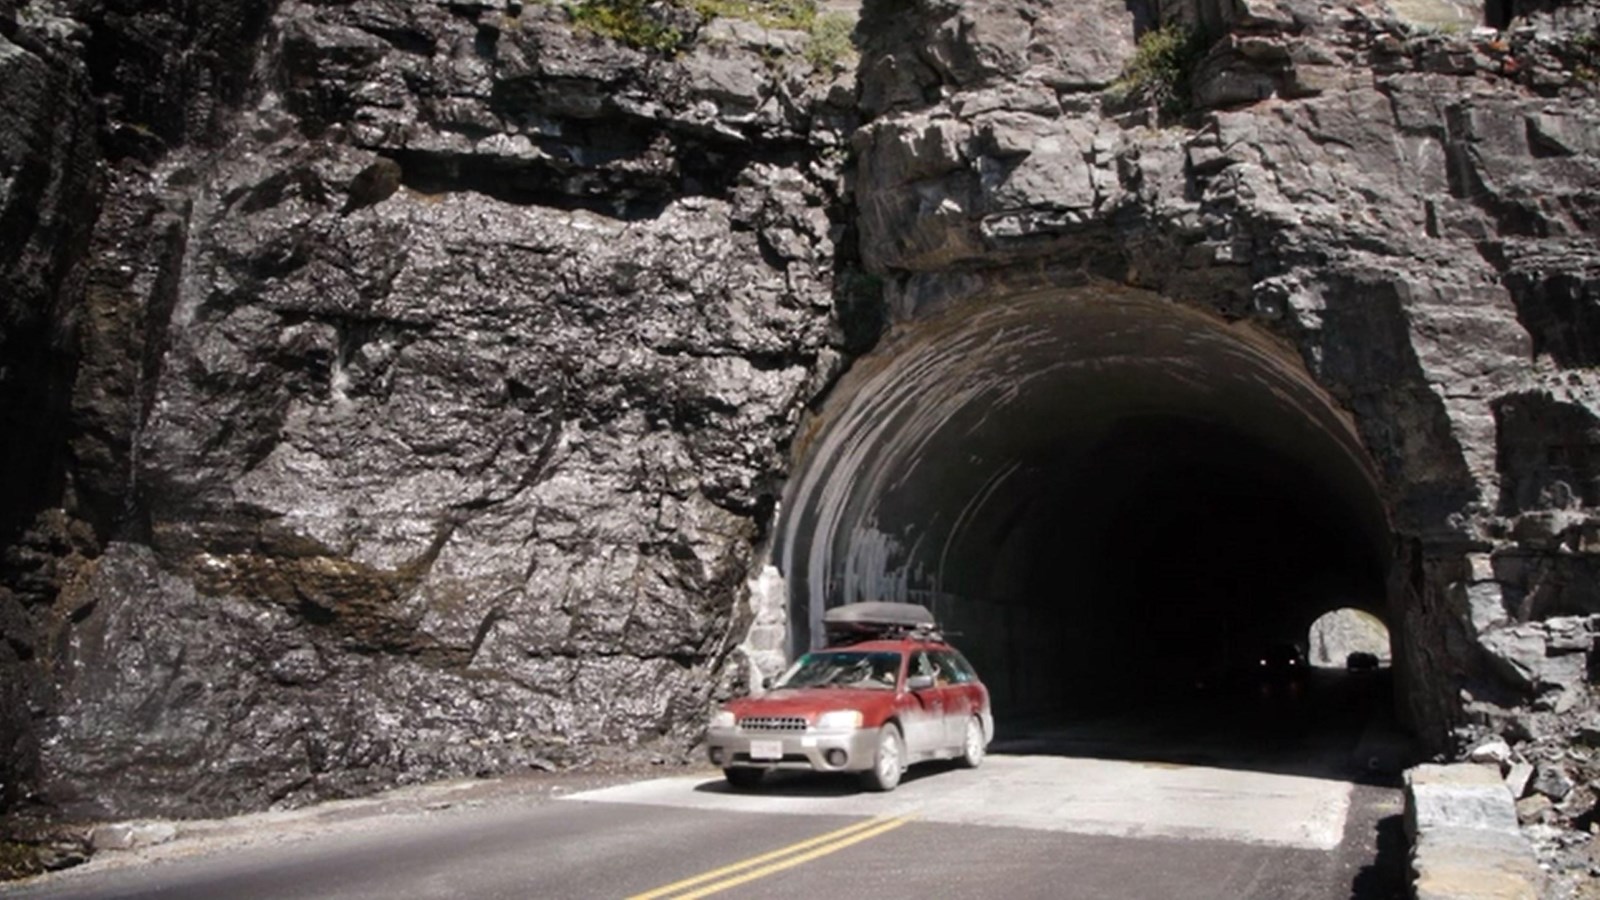 A car driving out of a tunnel carved into a mountainside.